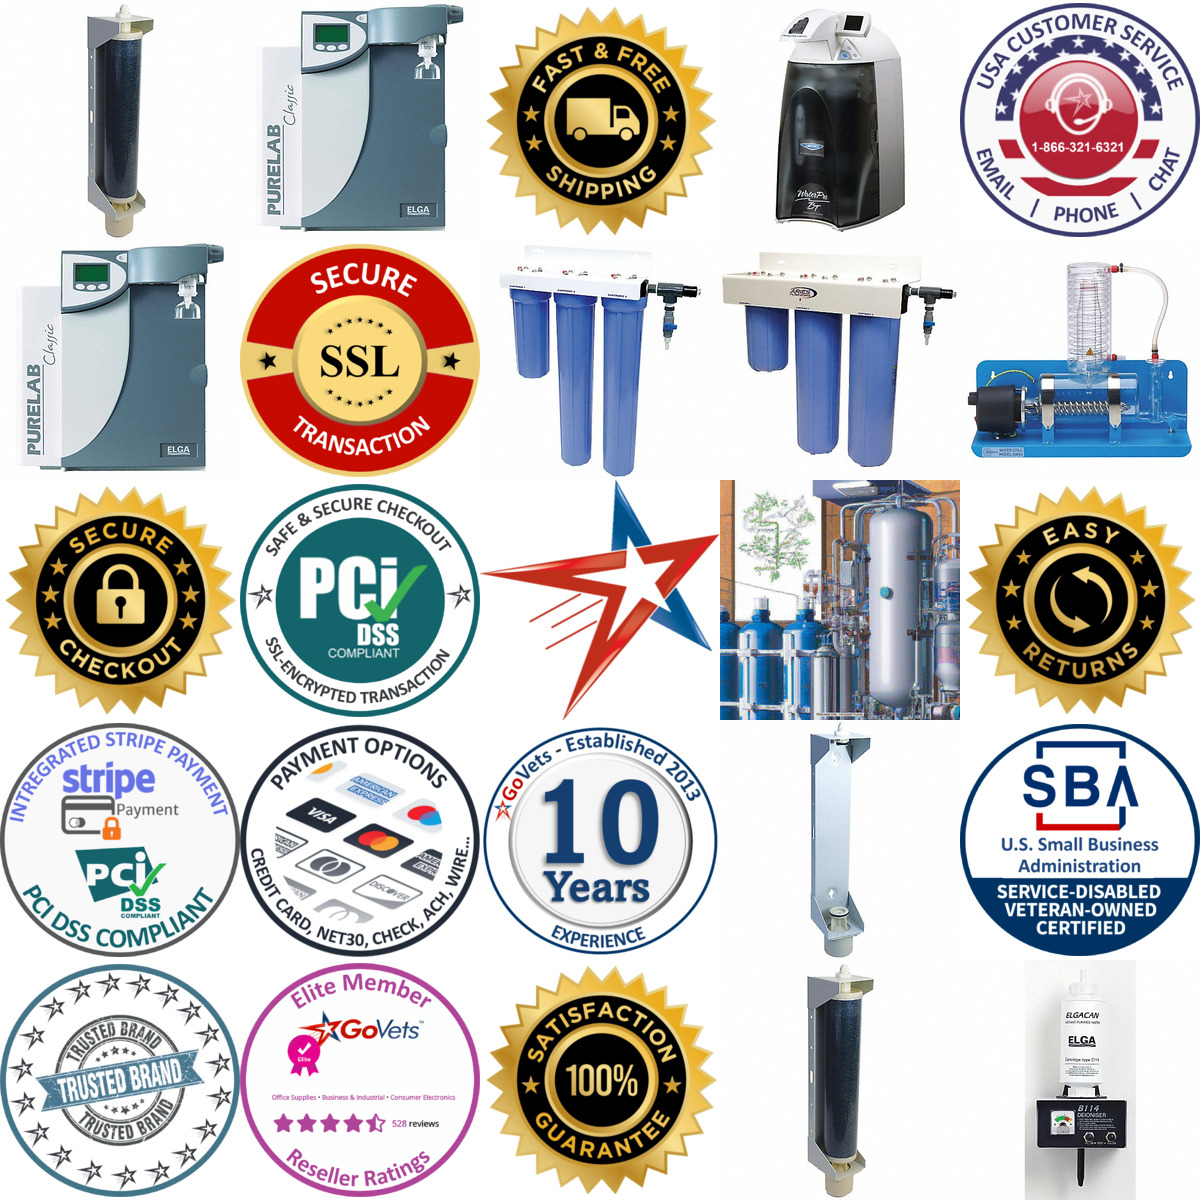 A selection of Water Purification Systems products on GoVets